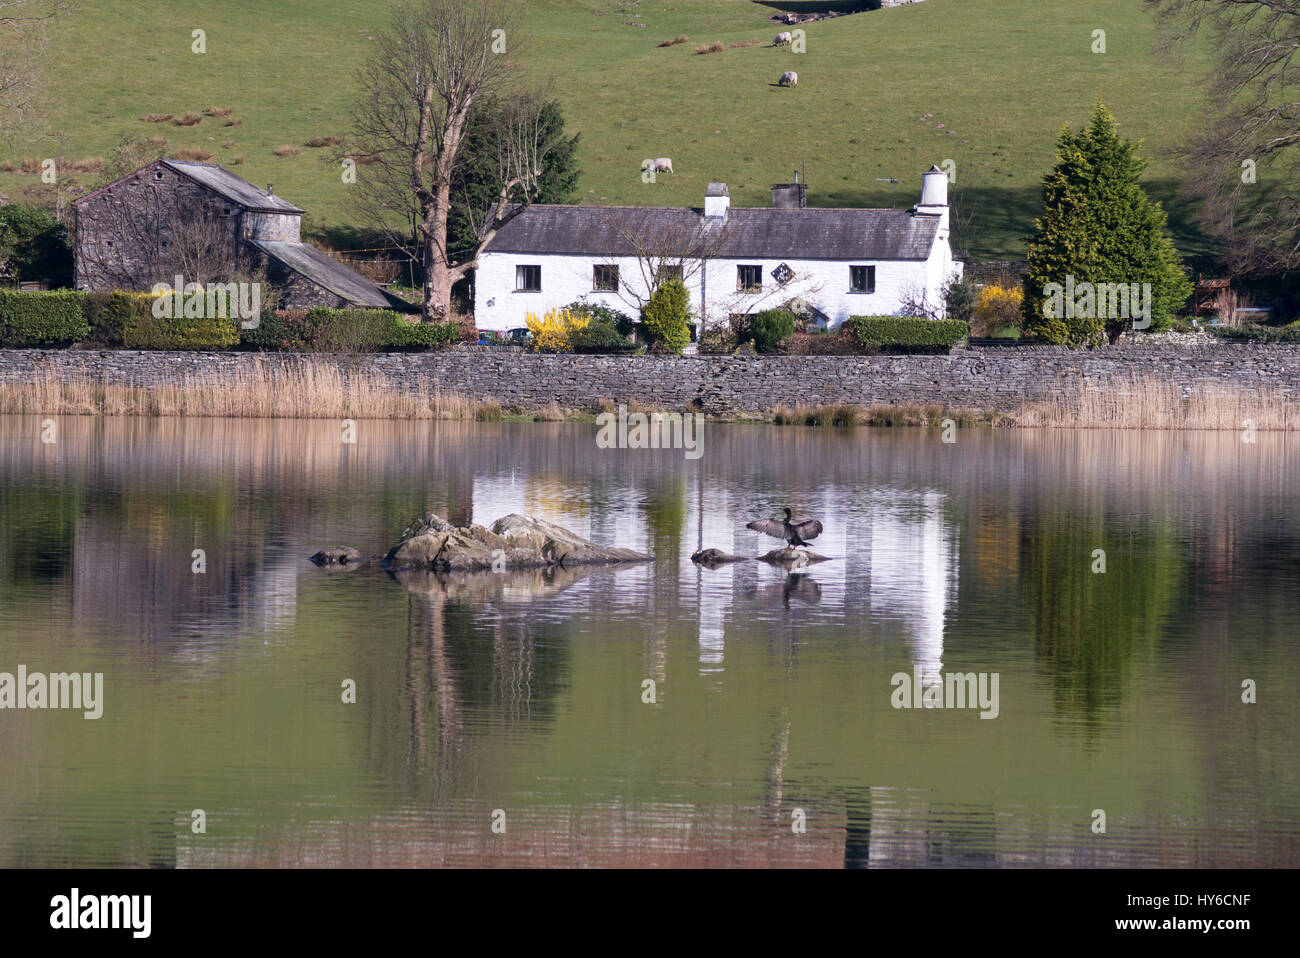 Nab Cottage and a cormorant reflected in Rydal water, Cumbria, England, UK Stock Photo